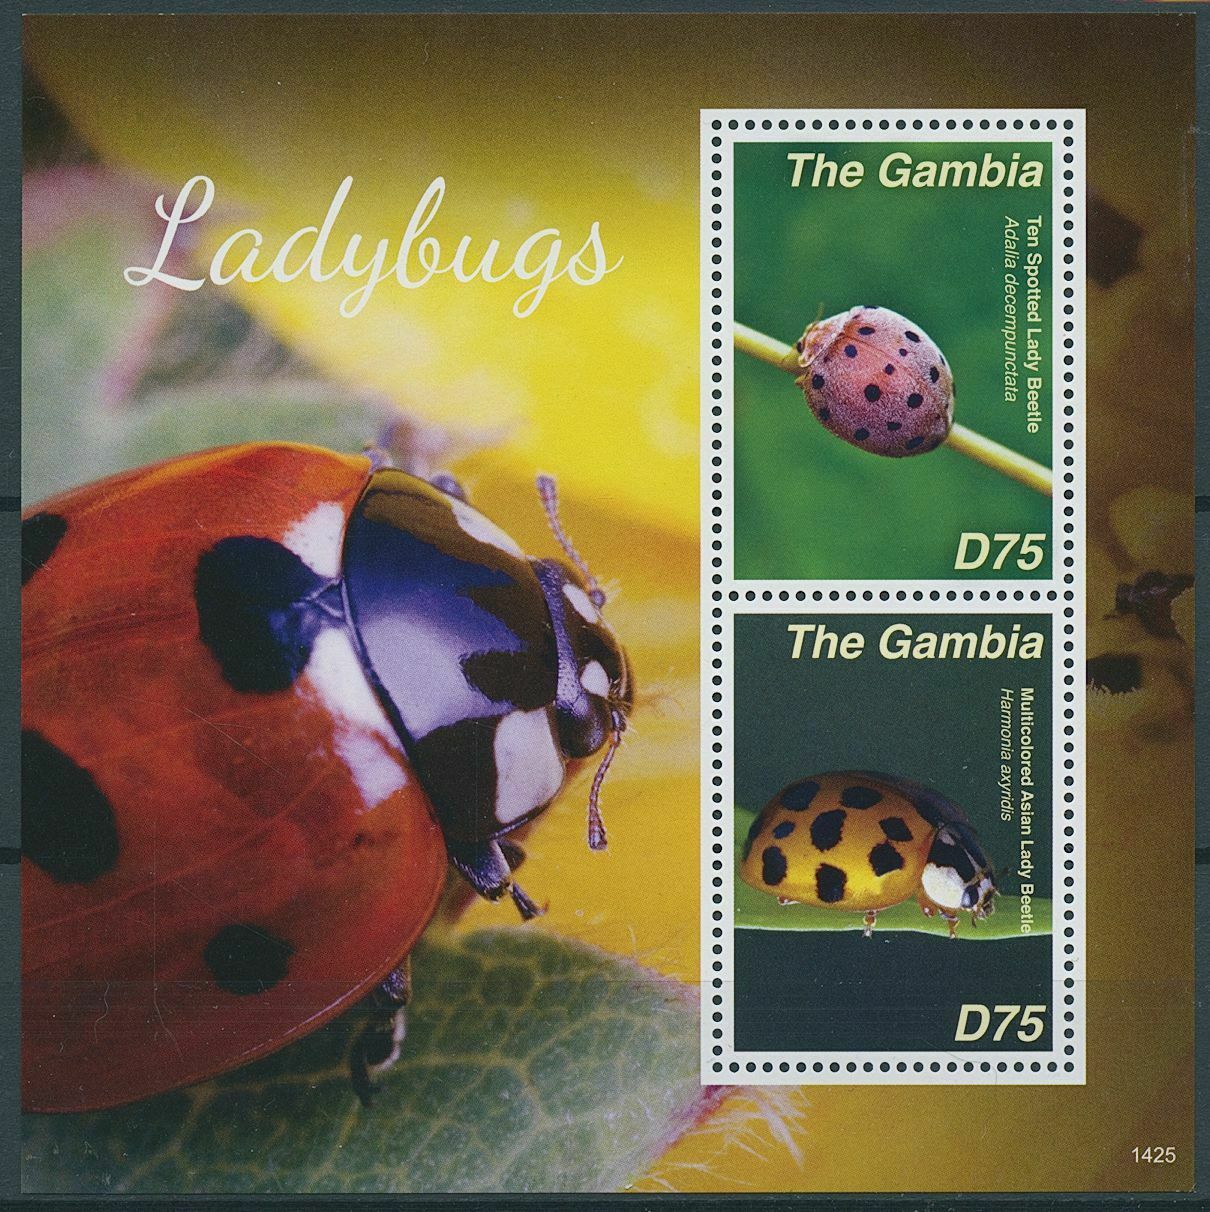 Gambia 2014 MNH Insects Stamps Ladybugs Beetles Ladybirds 2v S/S II